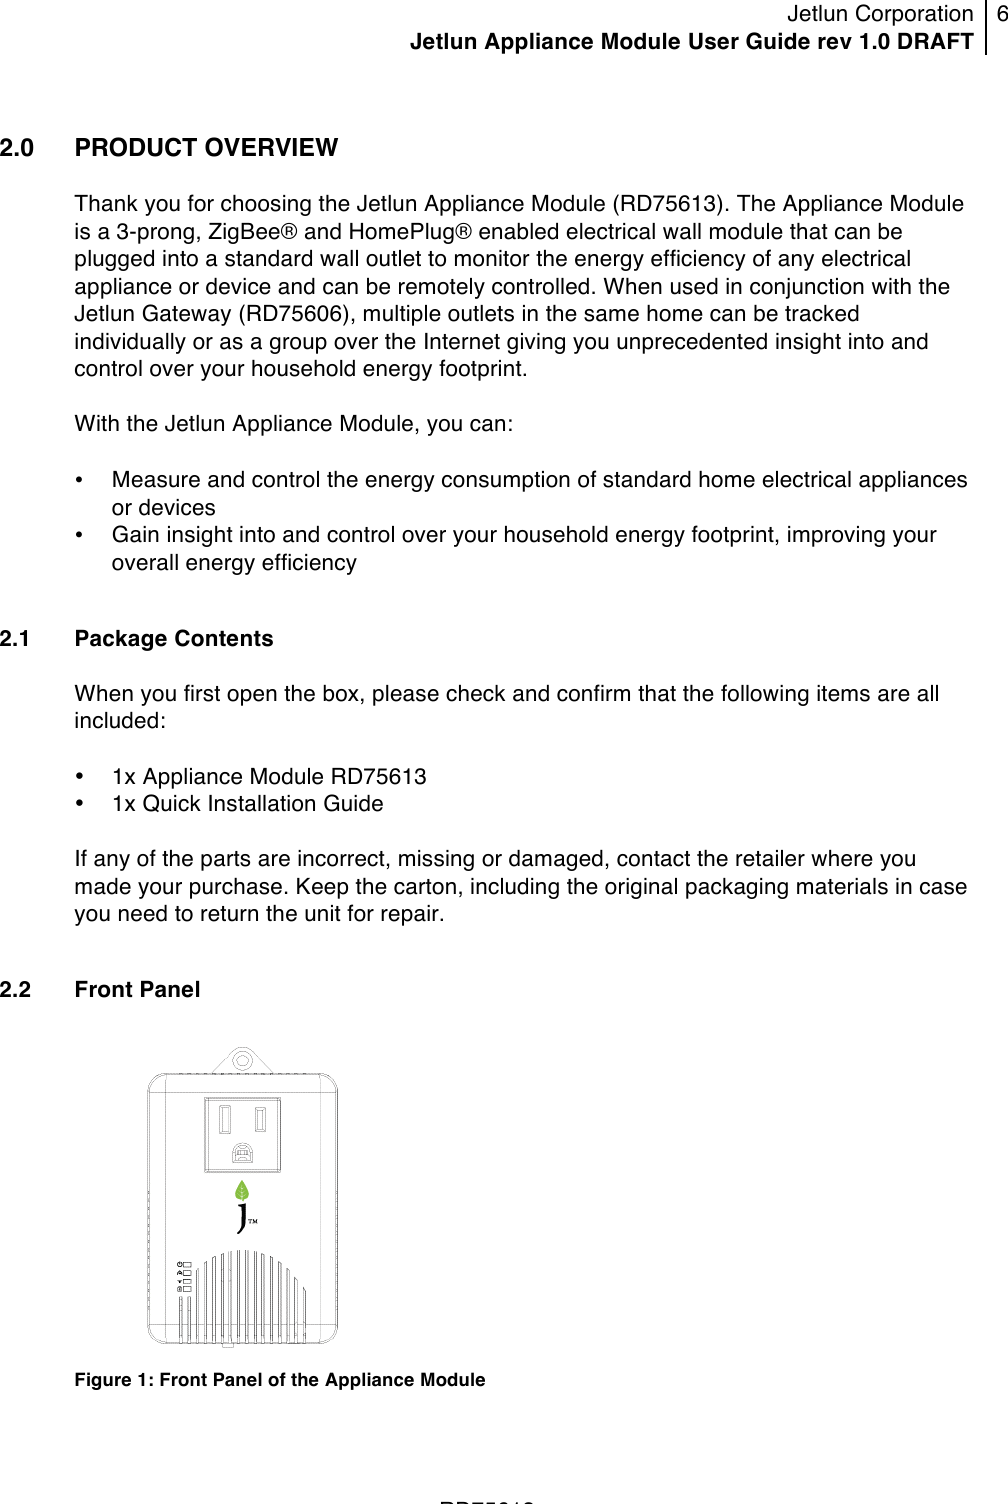 Jetlun Corporation Jetlun Appliance Module User Guide rev 1.0 DRAFT 6   !!!RD75613 !2.0   PRODUCT OVERVIEW  Thank you for choosing the Jetlun Appliance Module (RD75613). The Appliance Module is a 3-prong, ZigBee® and HomePlug® enabled electrical wall module that can be plugged into a standard wall outlet to monitor the energy efficiency of any electrical appliance or device and can be remotely controlled. When used in conjunction with the Jetlun Gateway (RD75606), multiple outlets in the same home can be tracked individually or as a group over the Internet giving you unprecedented insight into and control over your household energy footprint.  With the Jetlun Appliance Module, you can:  • Measure and control the energy consumption of standard home electrical appliances or devices • Gain insight into and control over your household energy footprint, improving your overall energy efficiency  2.1 Package Contents  When you first open the box, please check and confirm that the following items are all included:  • 1x Appliance Module RD75613 • 1x Quick Installation Guide  If any of the parts are incorrect, missing or damaged, contact the retailer where you made your purchase. Keep the carton, including the original packaging materials in case you need to return the unit for repair.  2.2 Front Panel   Figure 1: Front Panel of the Appliance Module  